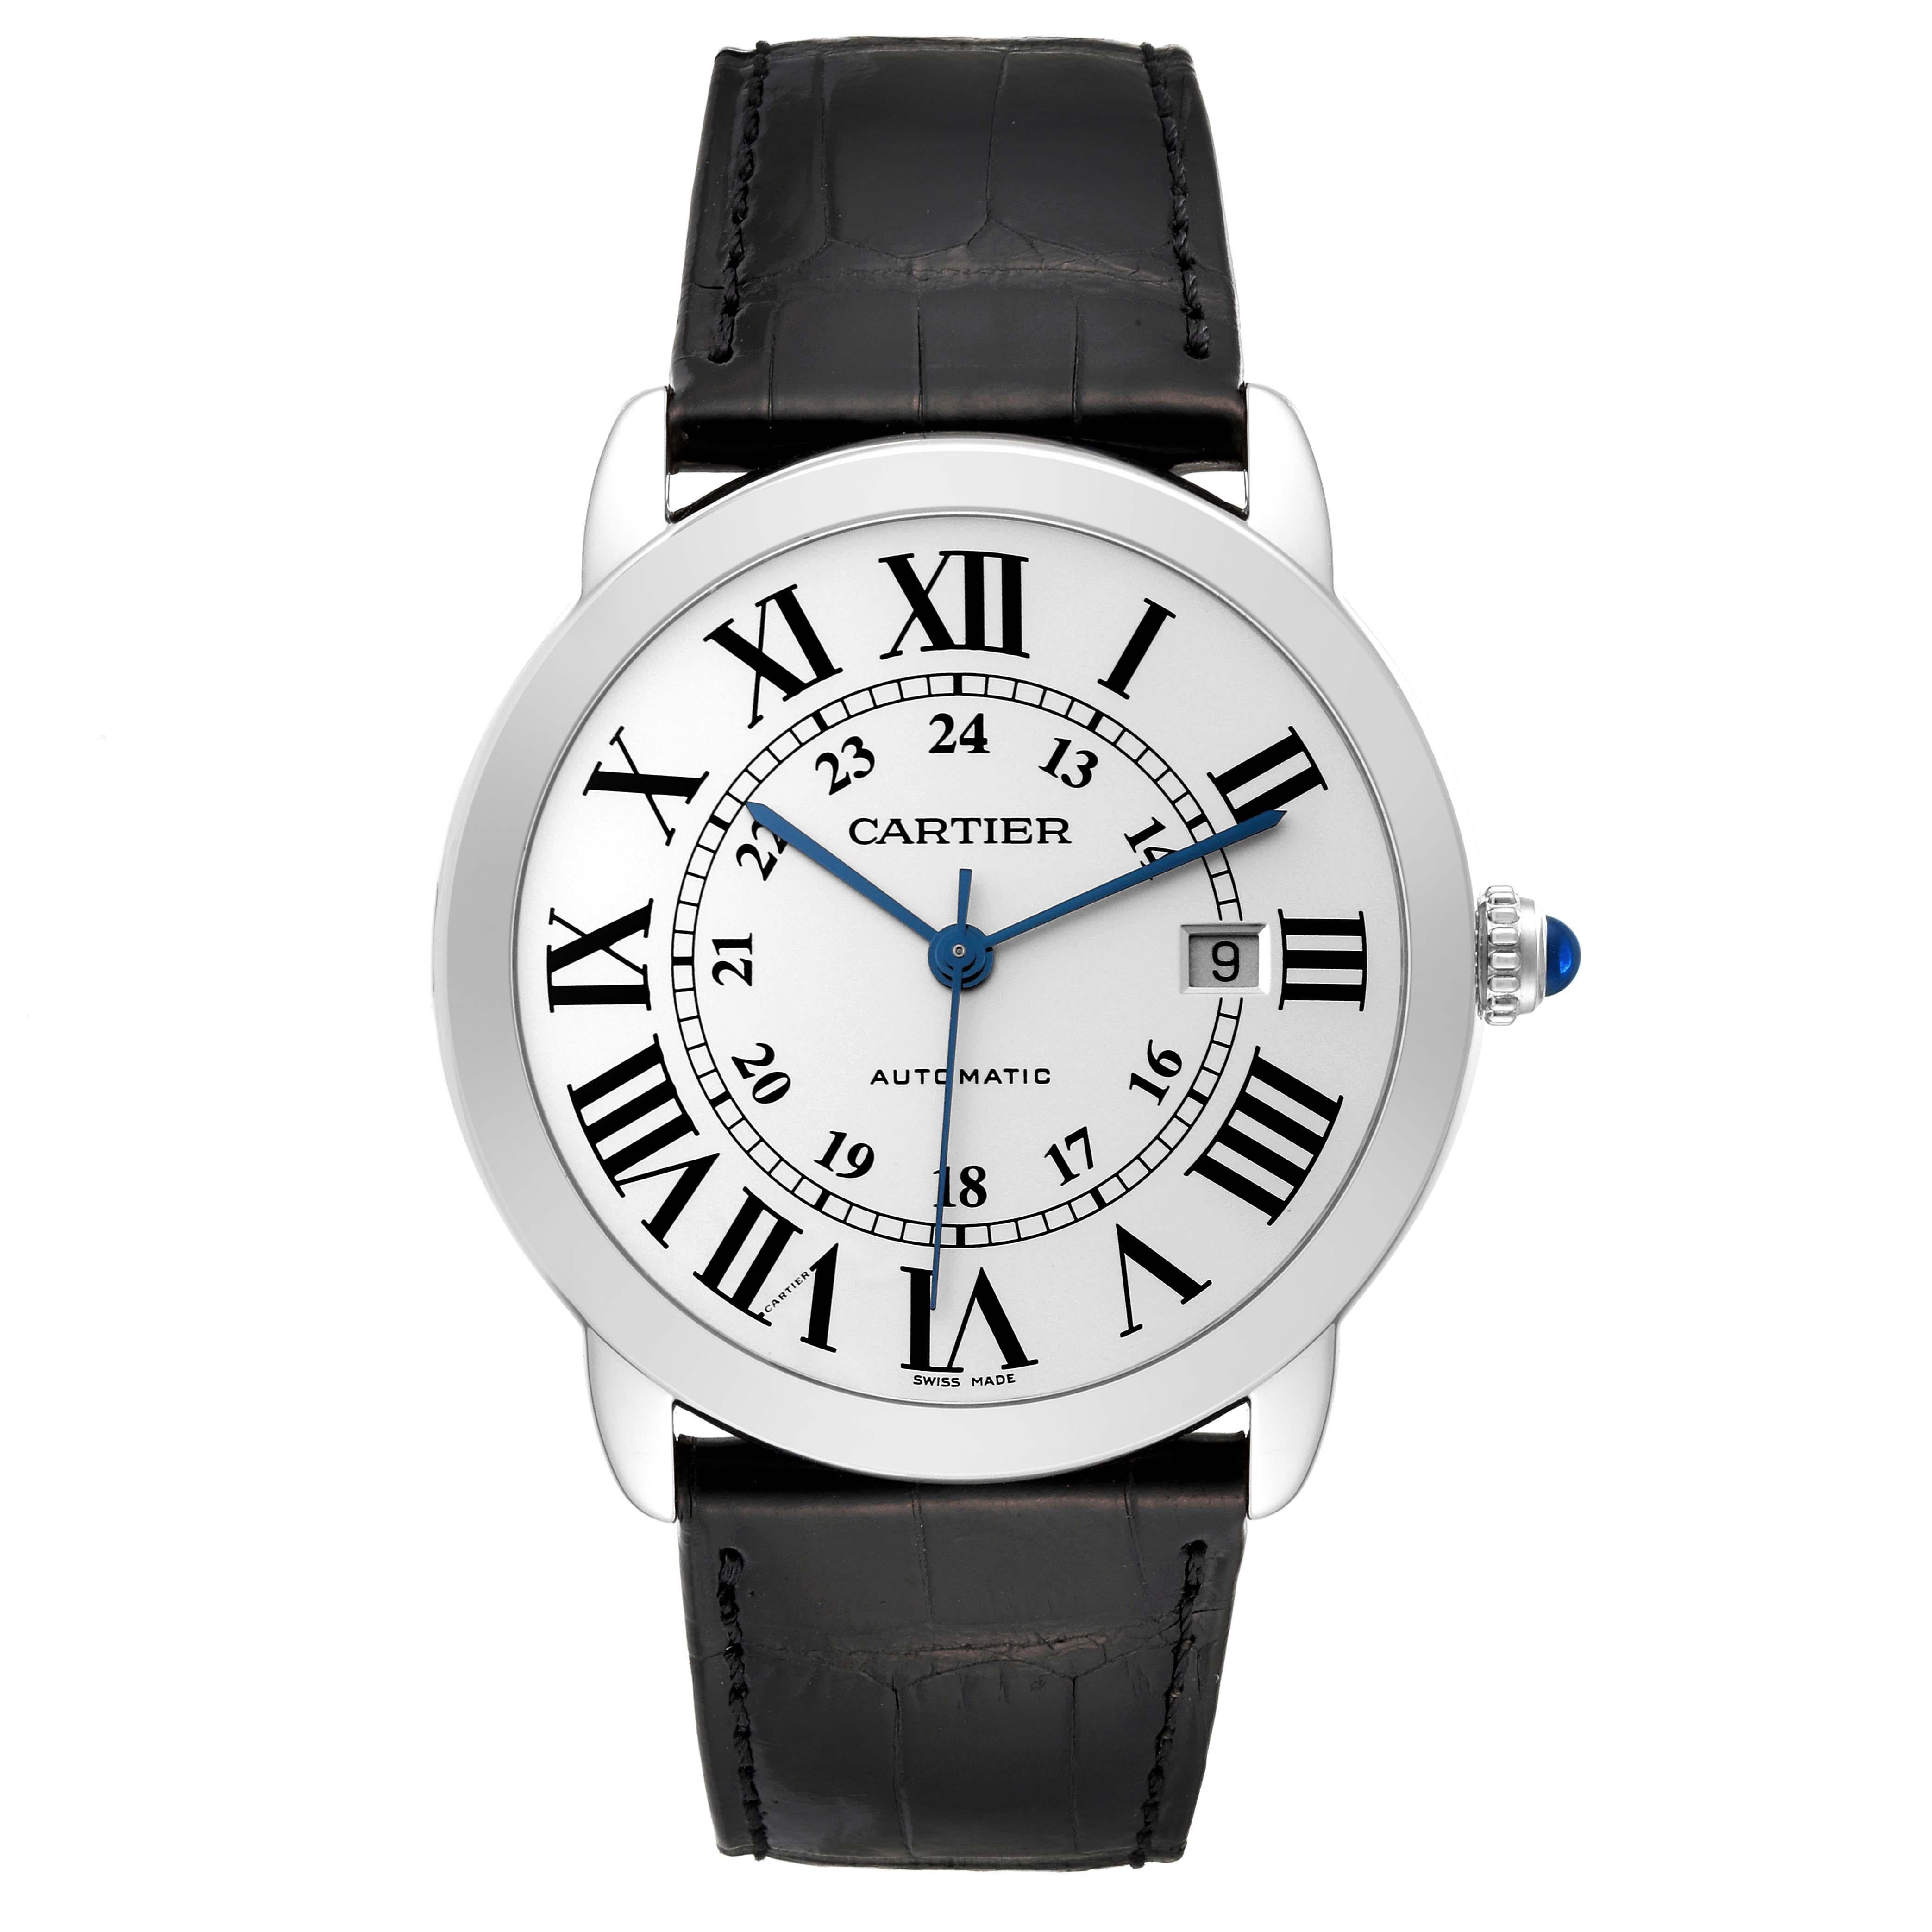 Cartier Ronde Solo XL Silver Dial Steel Mens Watch W6701010. Automatic self-winding movement. Stainless steel case 42.0 mm in diameter. Circular grained crown set with the blue spinel cabochon. . Scratch resistant sapphire crystal. Silvered opaline